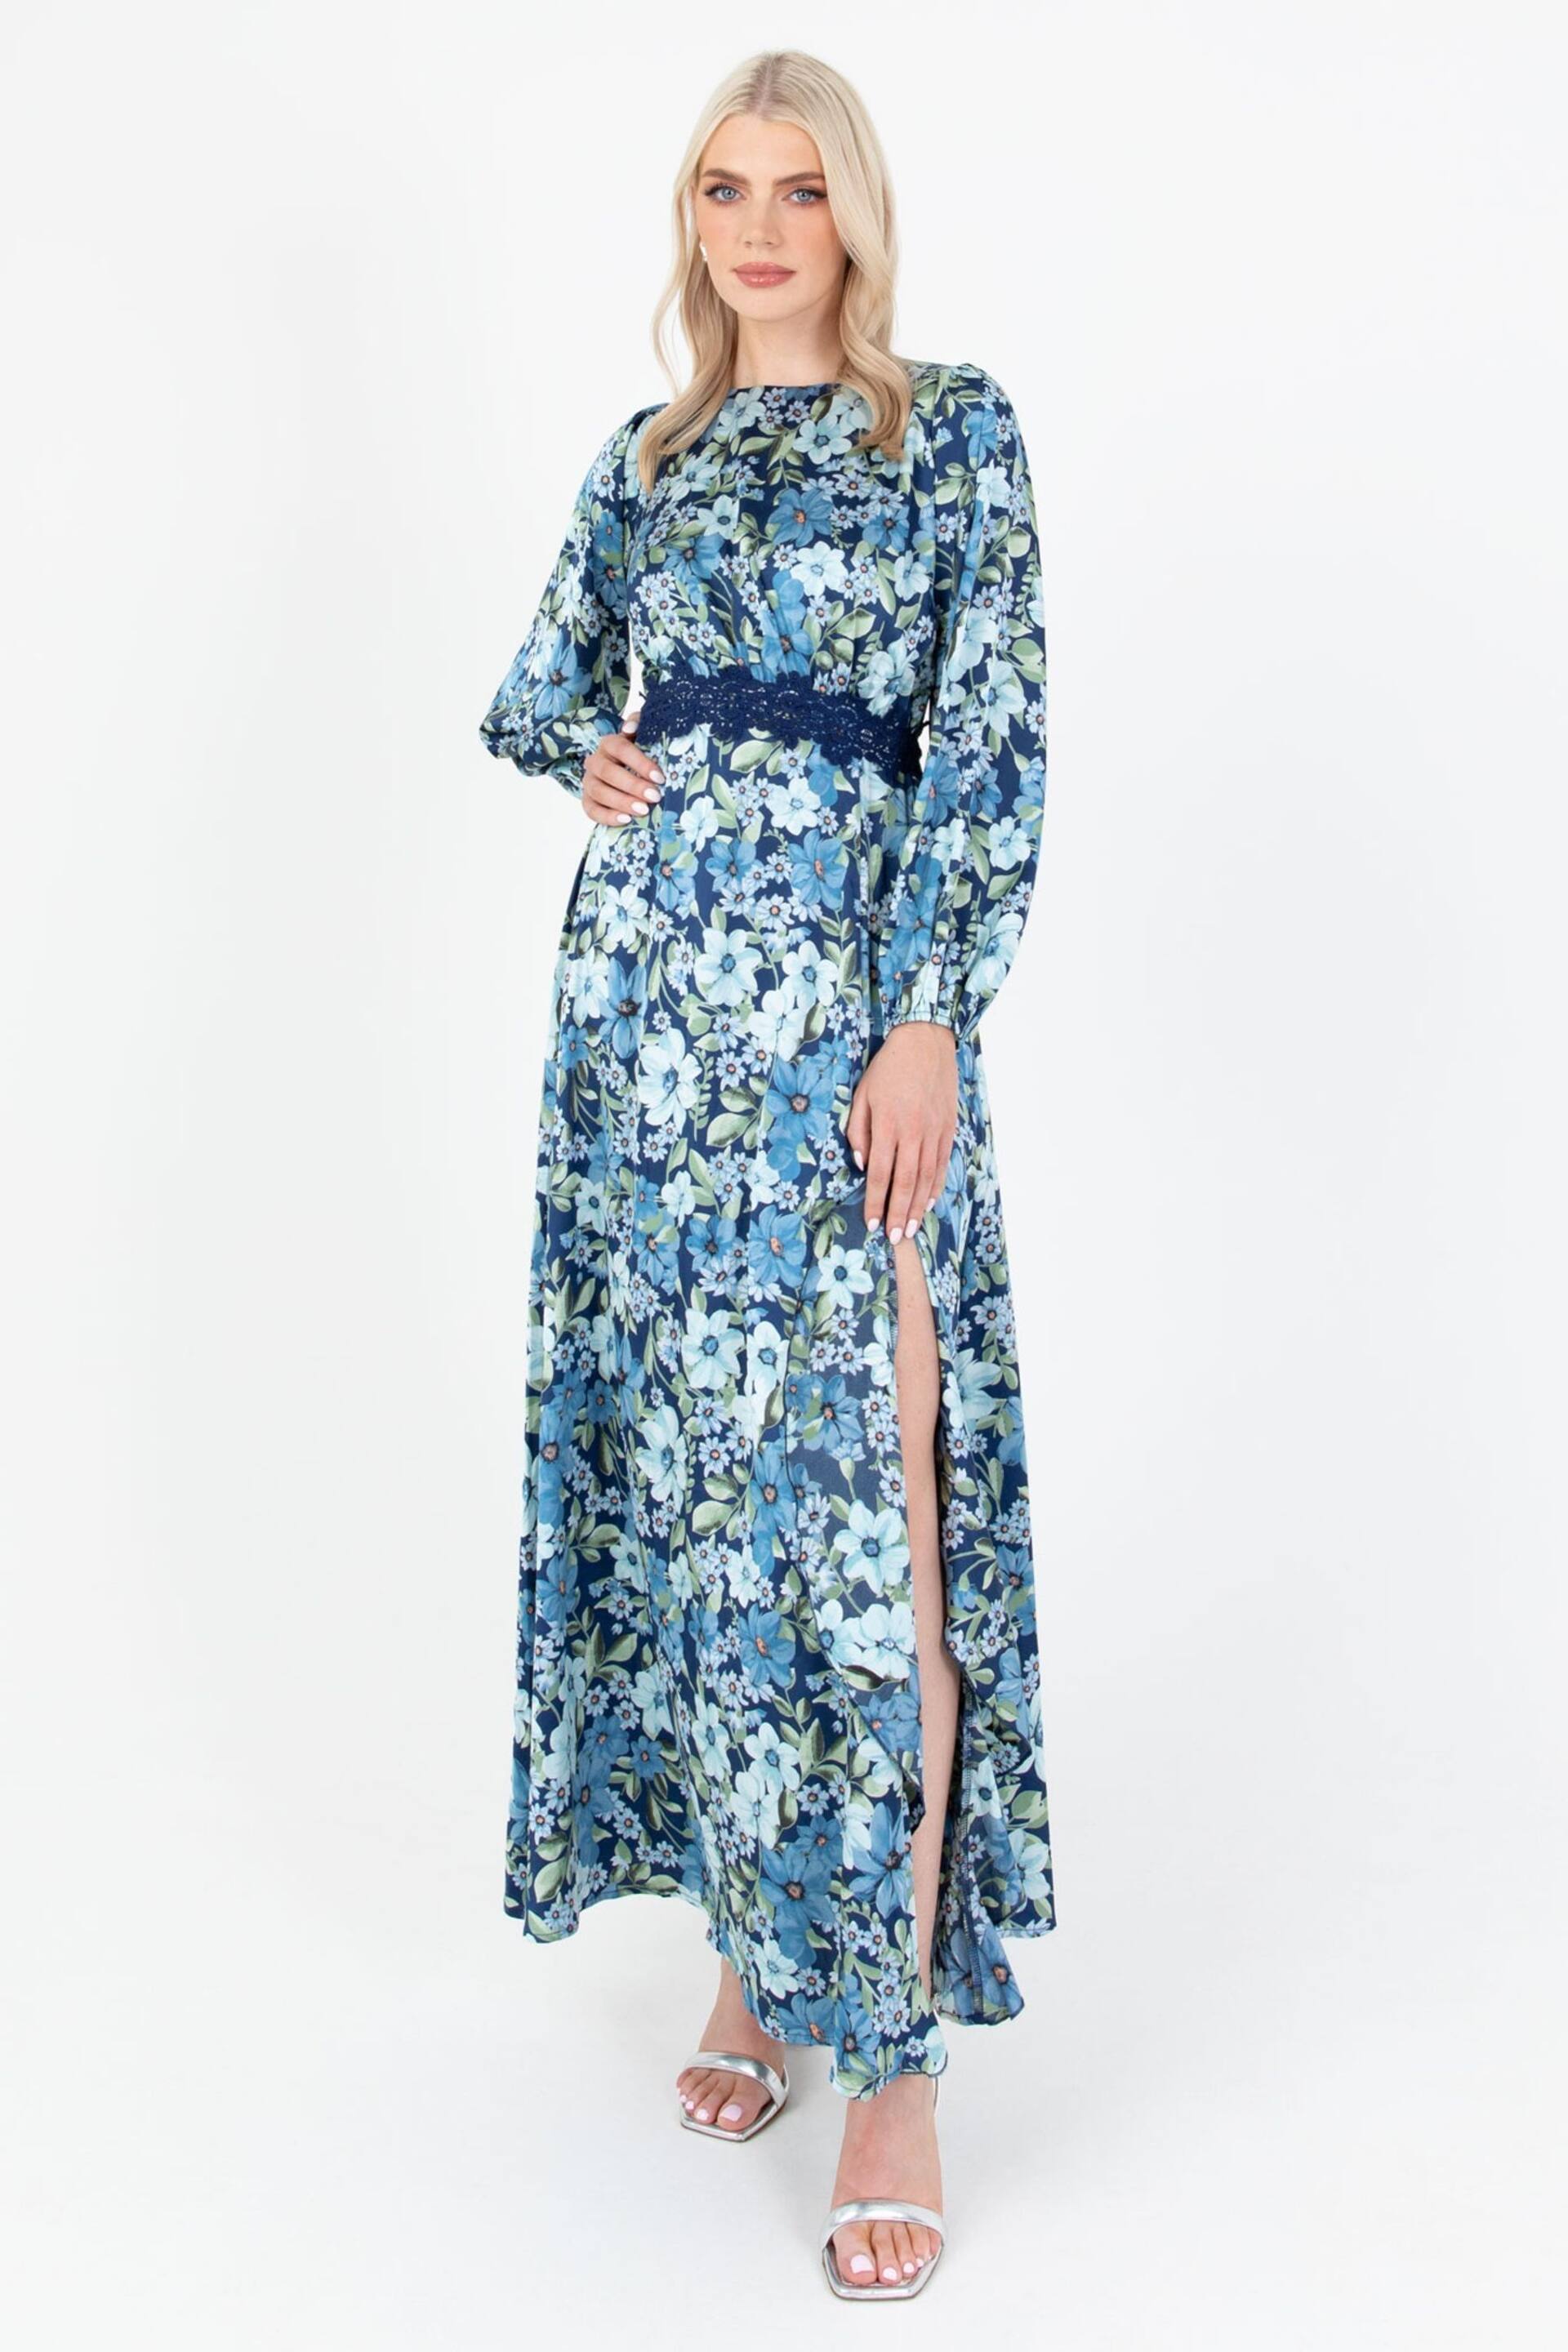 Lovedrobe Blue Floral Print Satin Maxi Dress with Lace Trim - Image 1 of 5